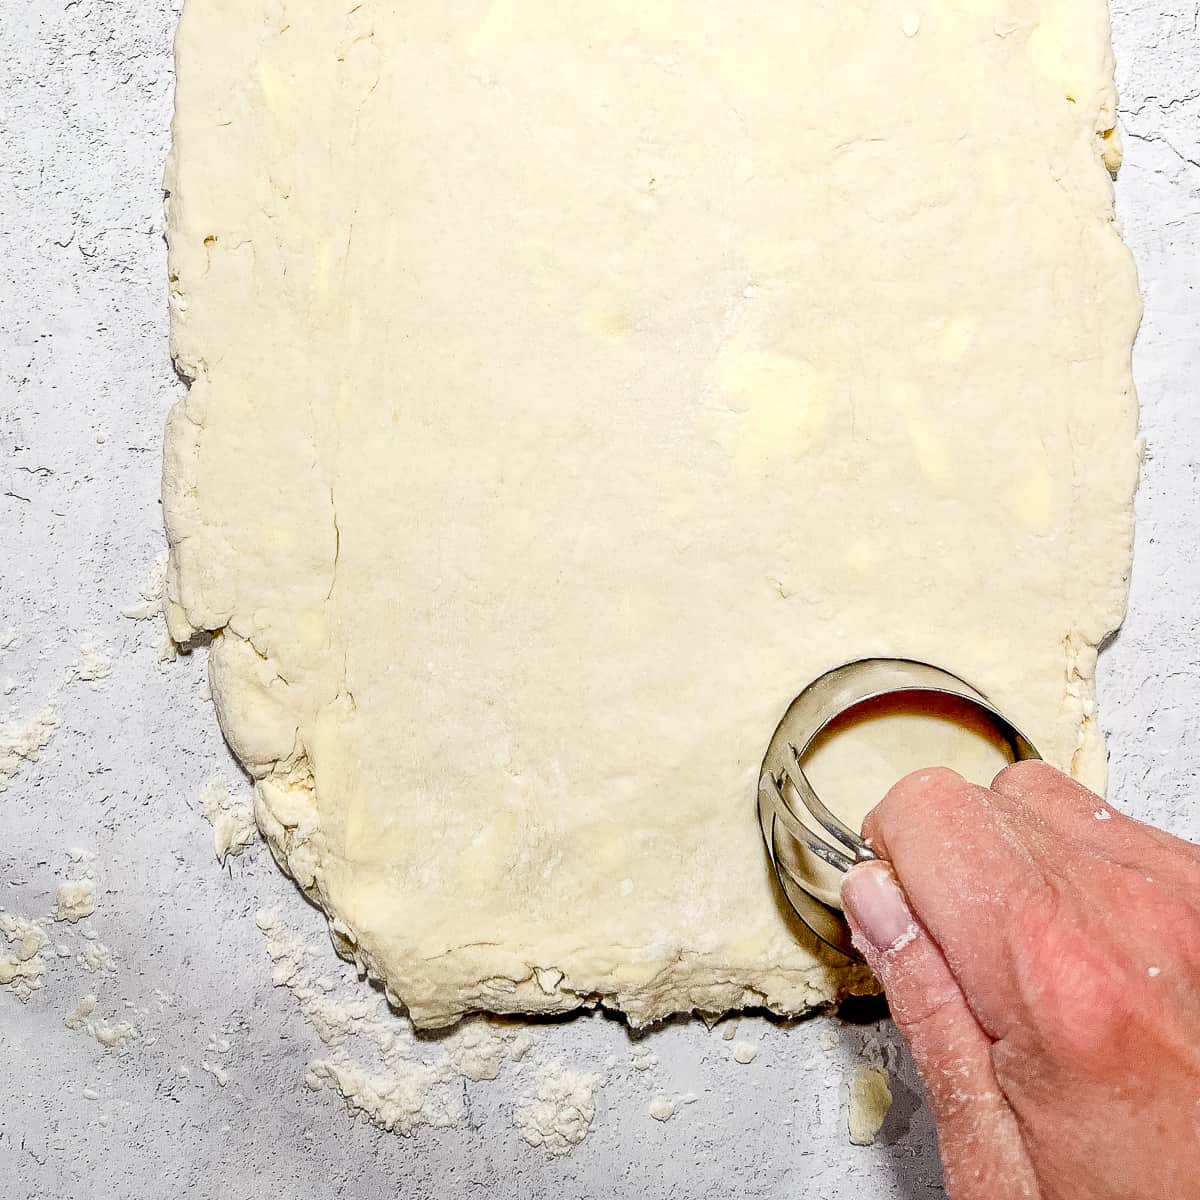 cutting out biscuits from large piece of dough.